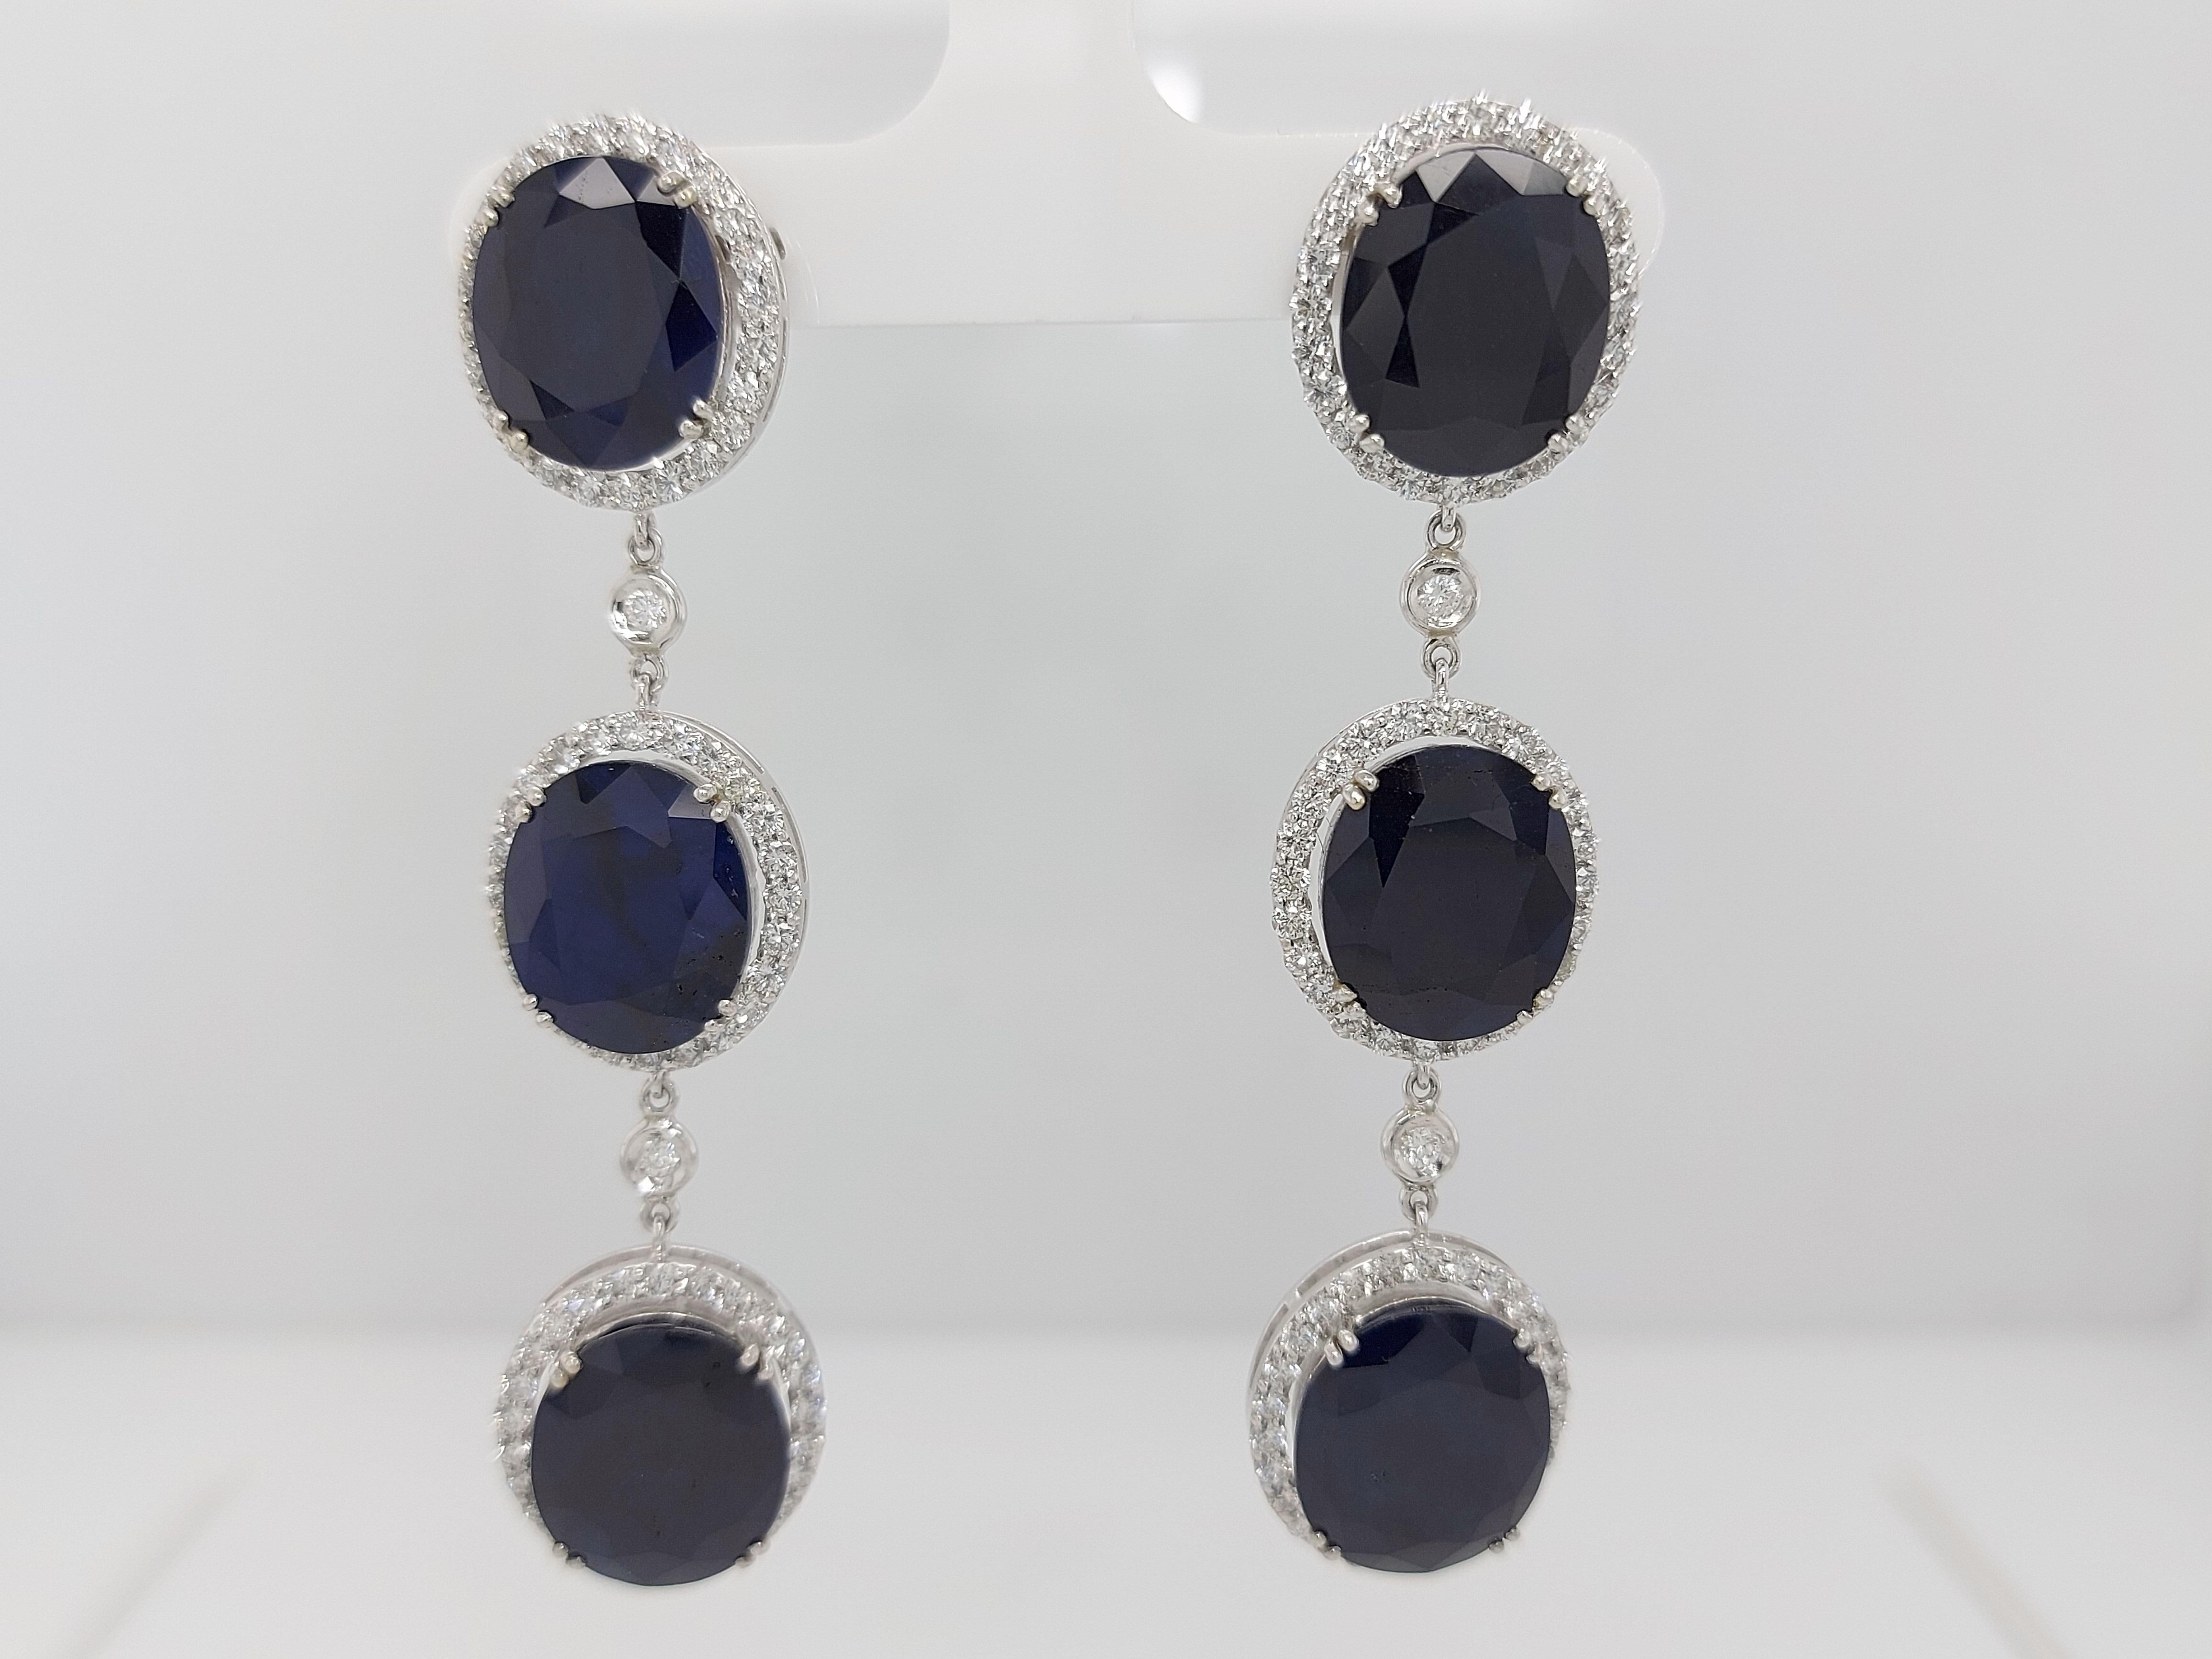 Oval Cut 18kt White Gold Earrings 43.56ct Sapphire, 3.51ct Diamond For Sale